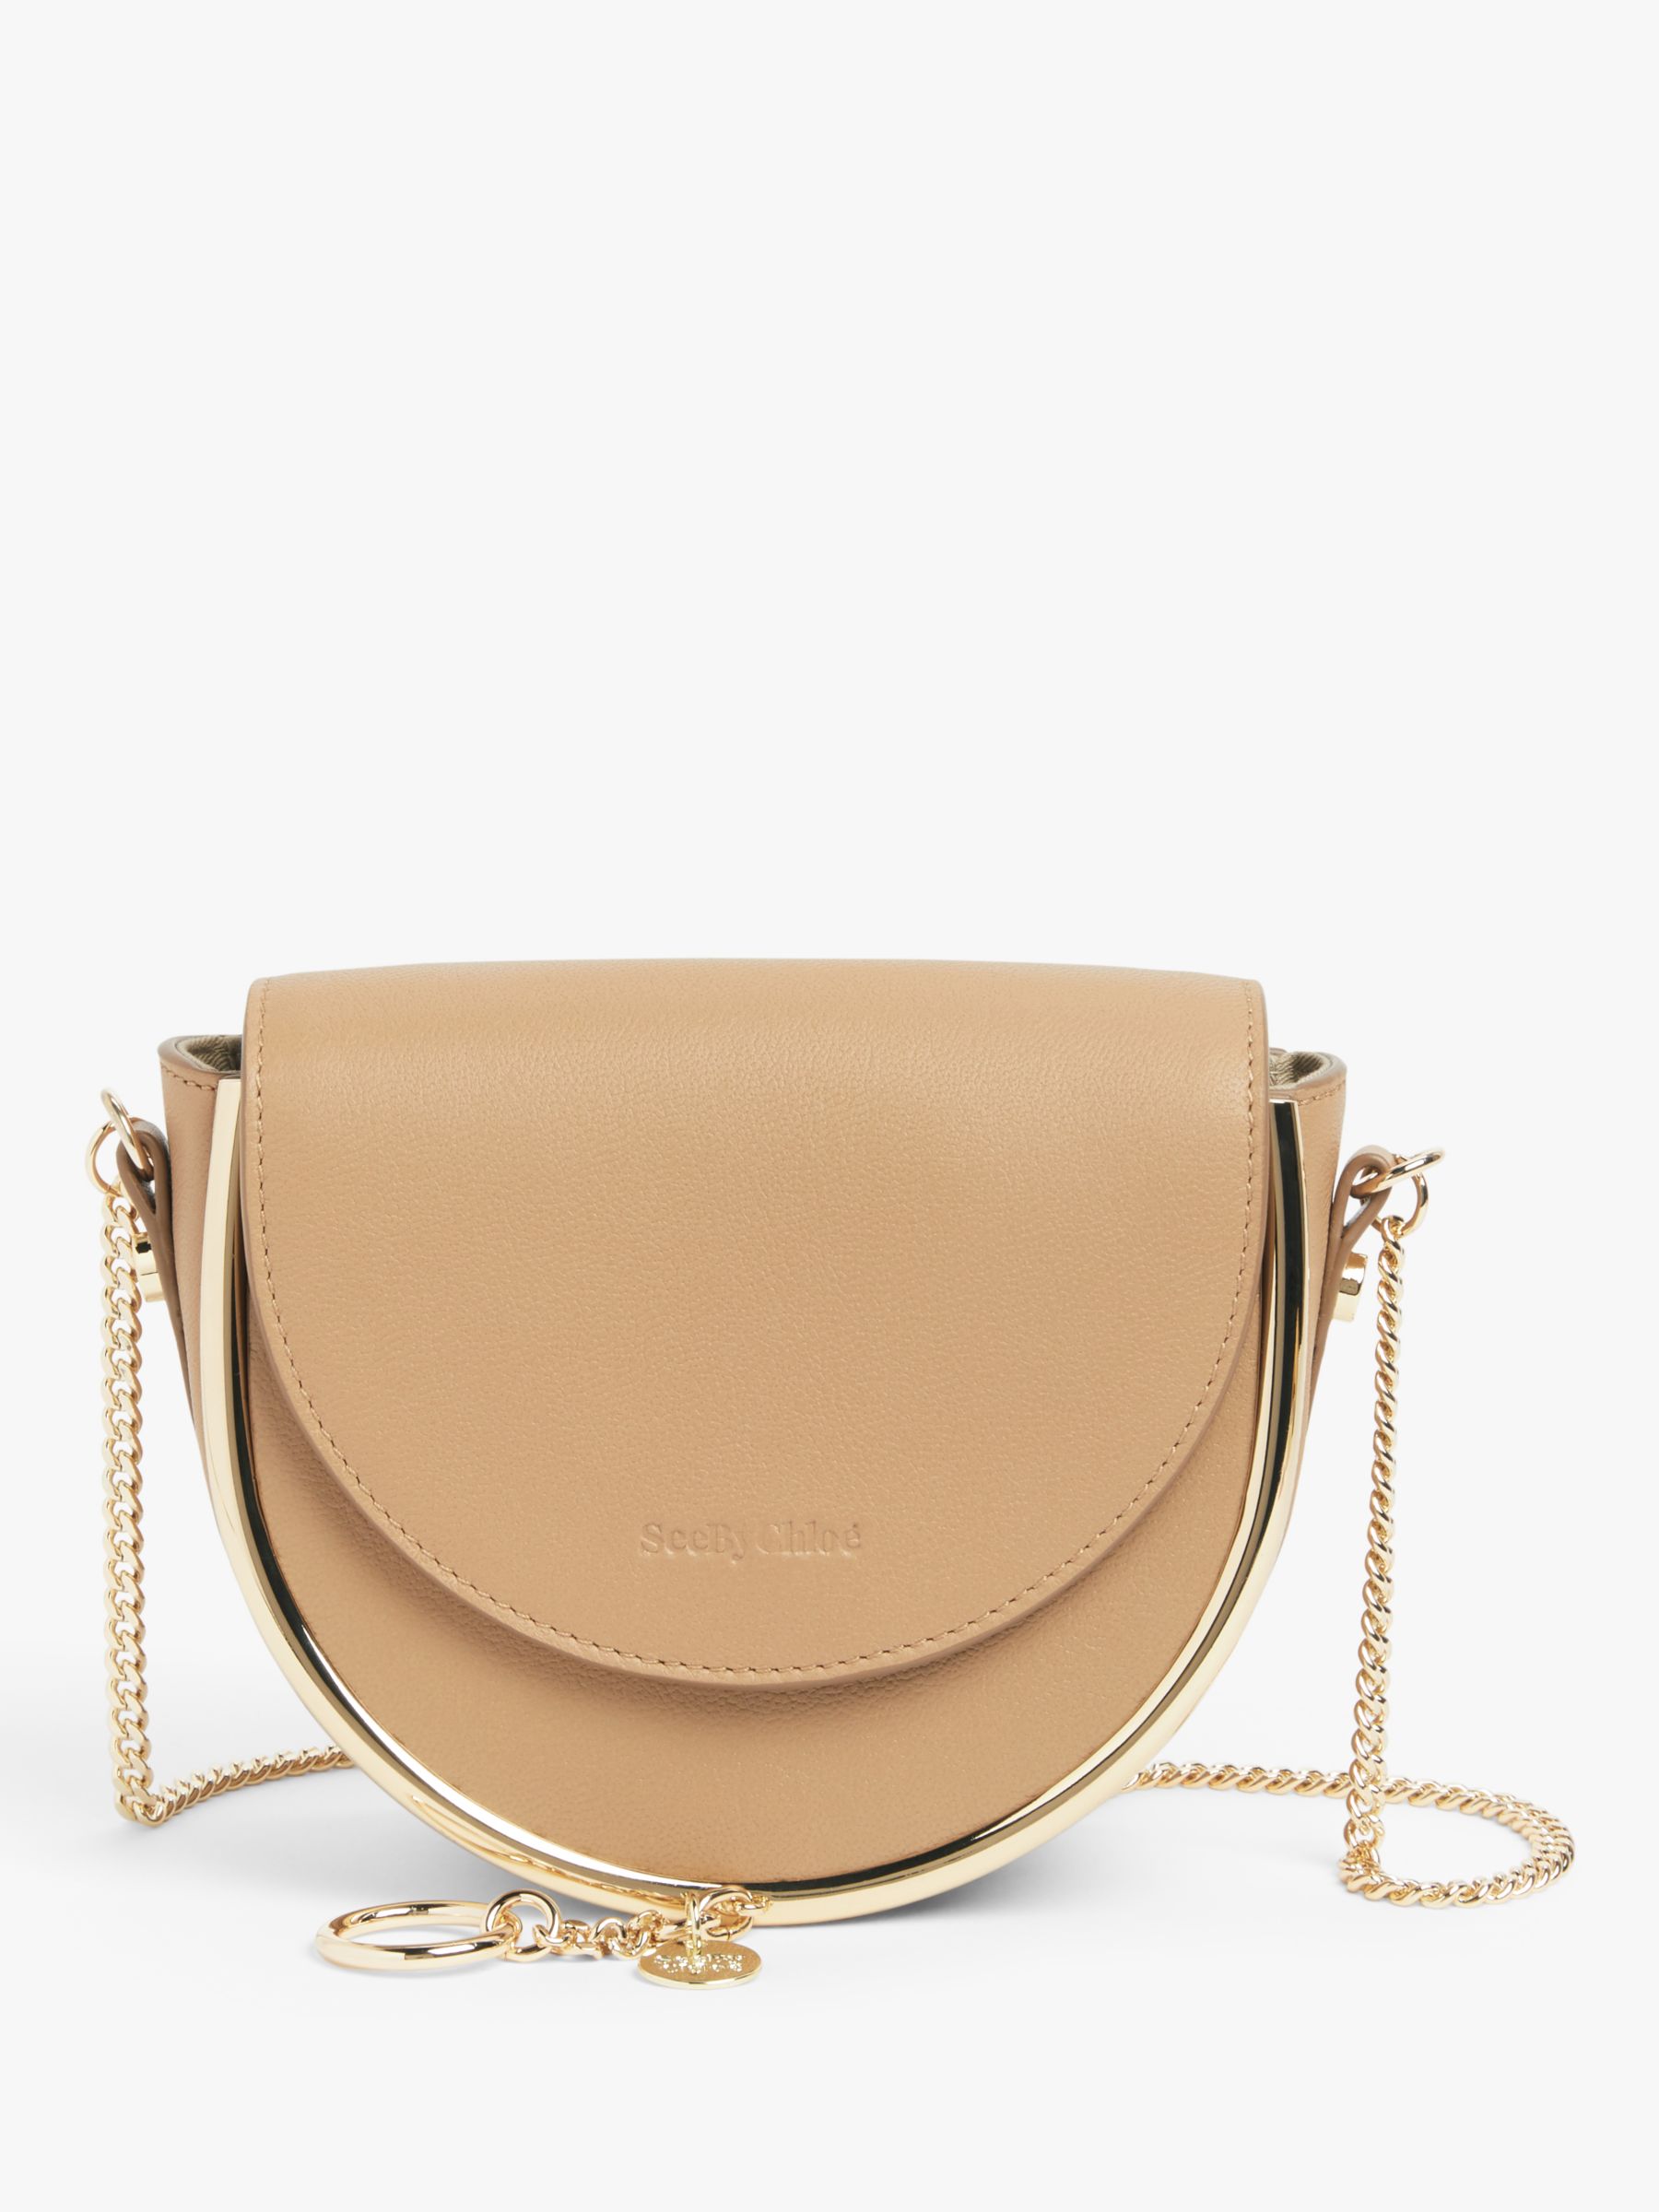 See By Chloé Mara Mini Chain Leather Cross Body Bag, Coconut Brown at ...